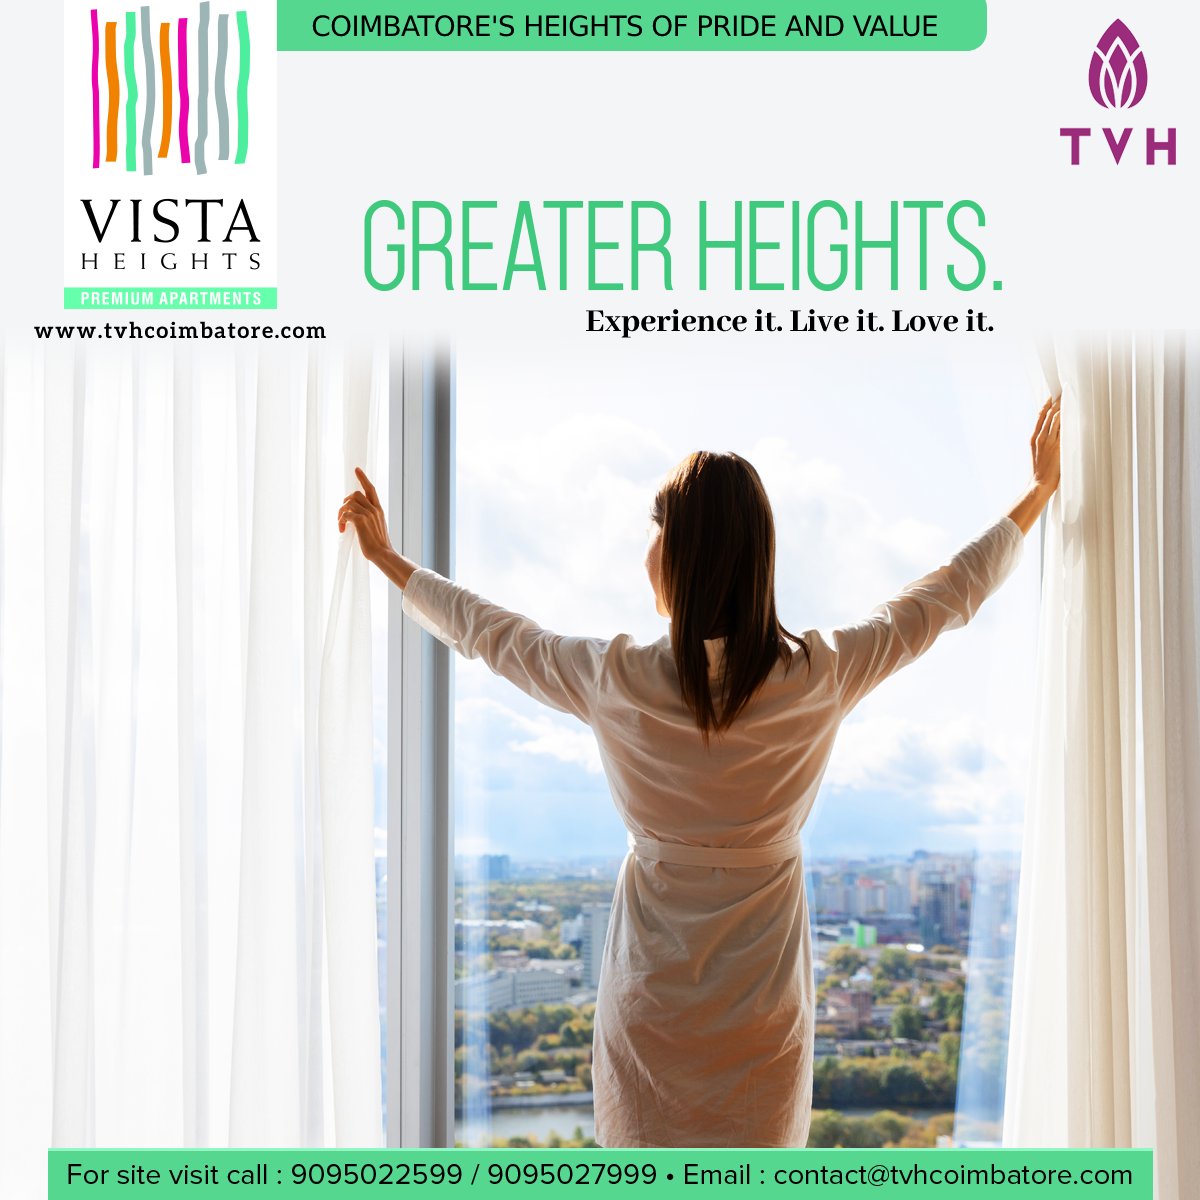 Greater heights. Experience it. Live it. Love it.
#chennairealestate #chennaiapartments #home #realestate #property #dreamhome #luxuryhomes #LuxuryLiving #gatedcommunity #properties #villas #villa #luxuryvilla #luxuryvillas #apartmentsinchennai